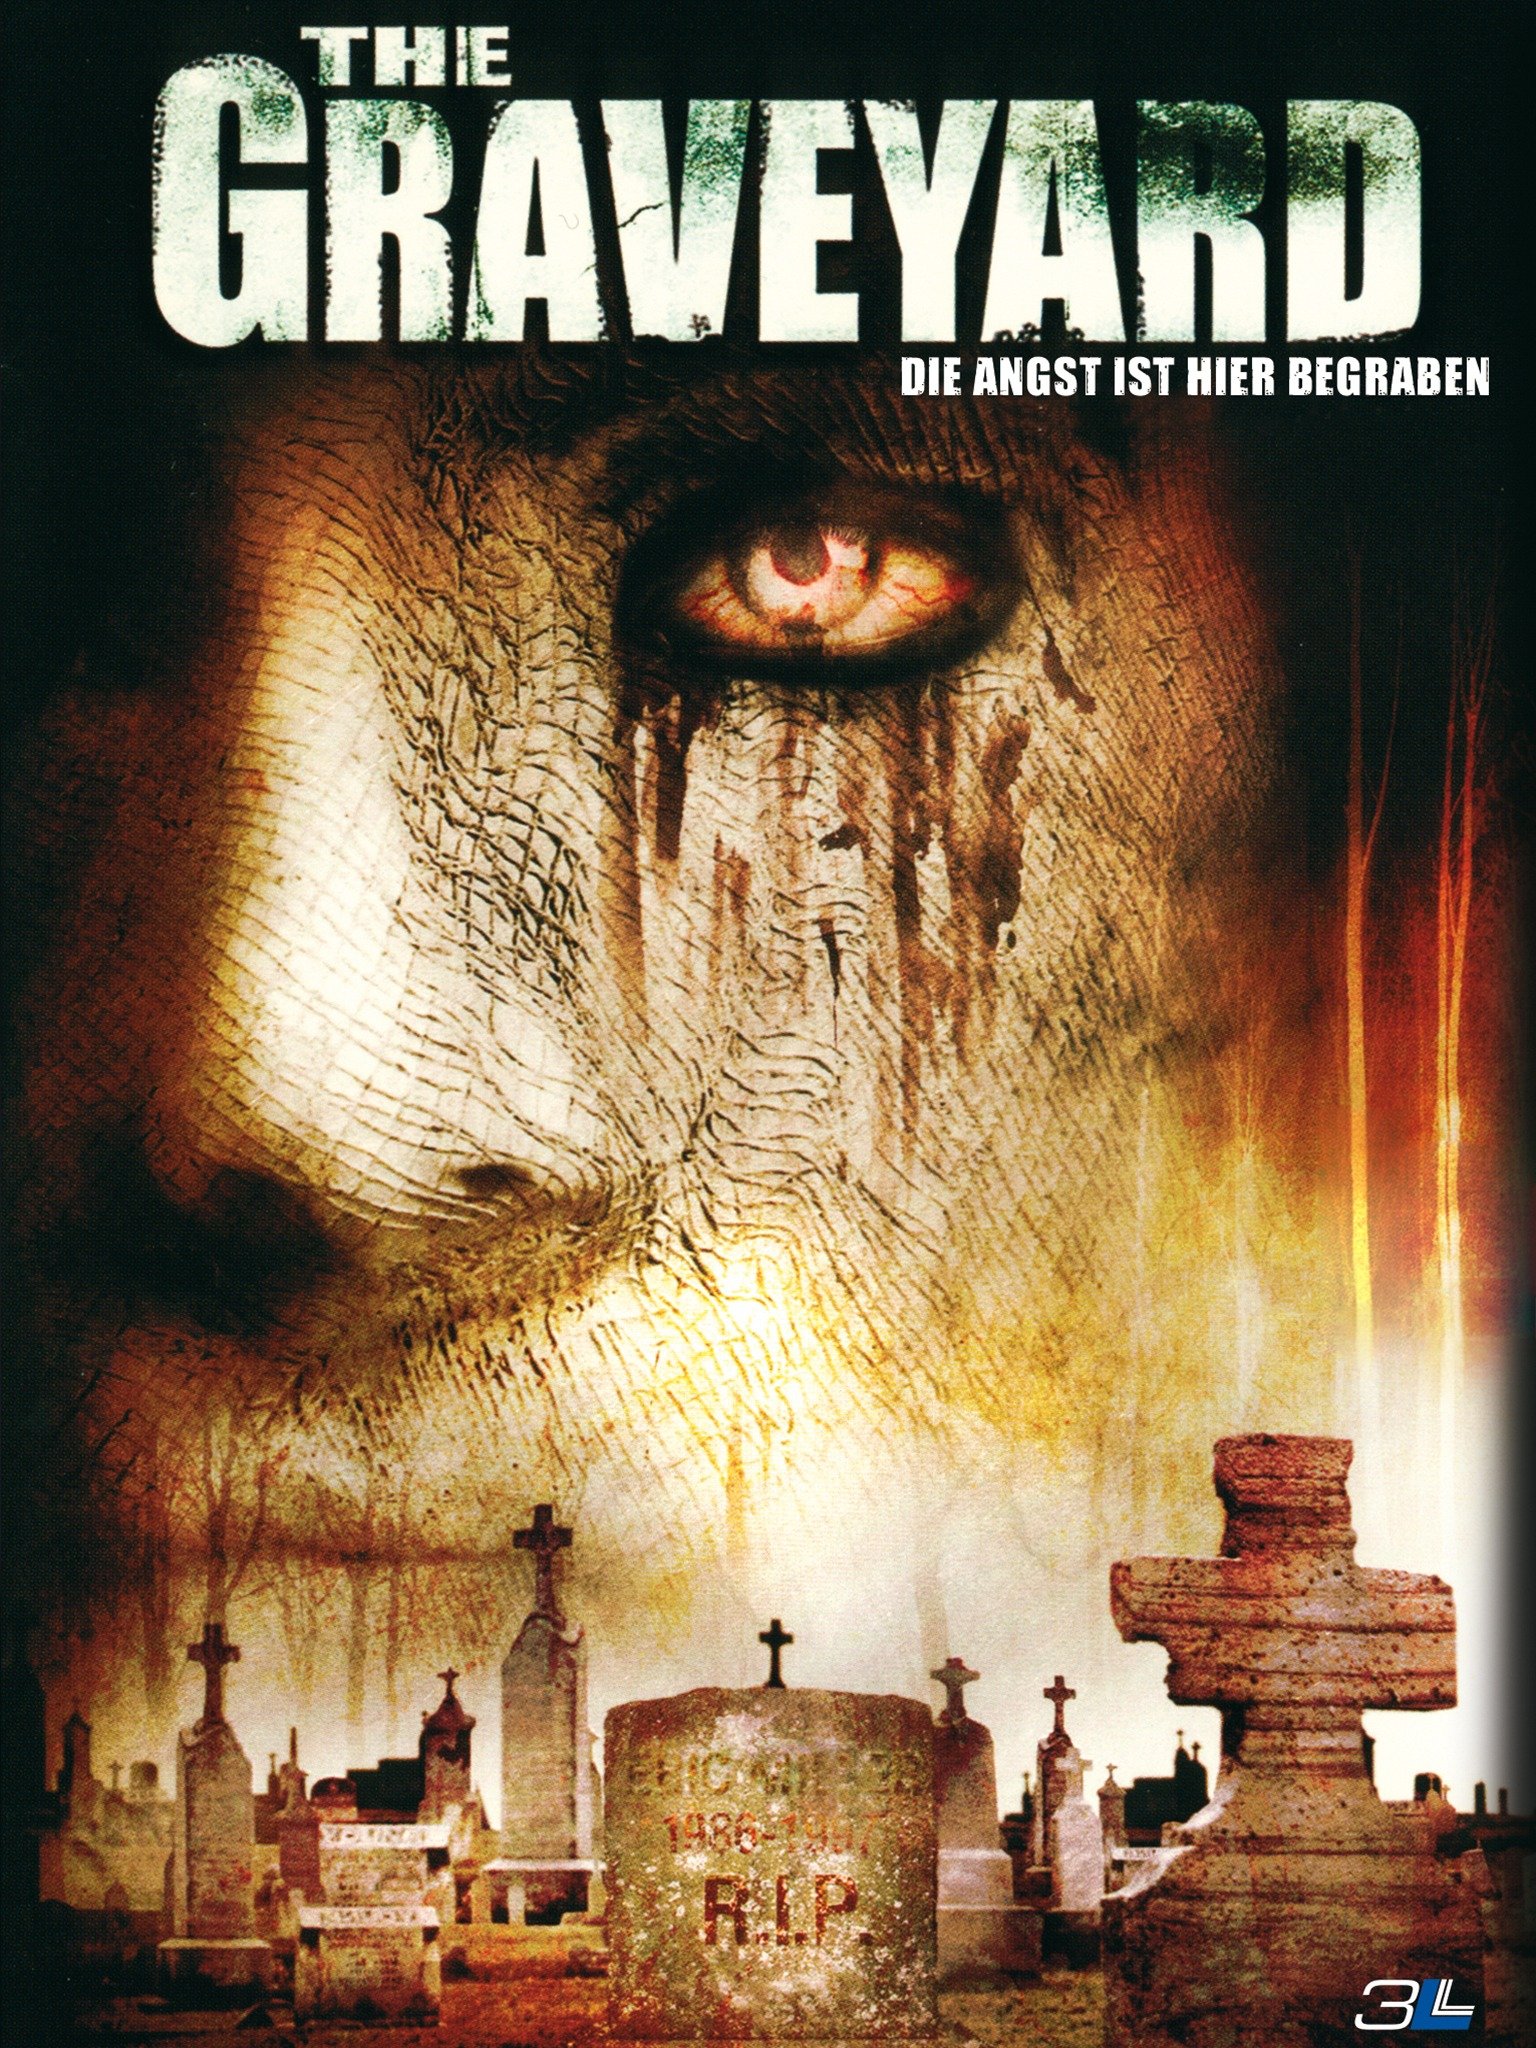 The Graveyard 2006 Rotten Tomatoes